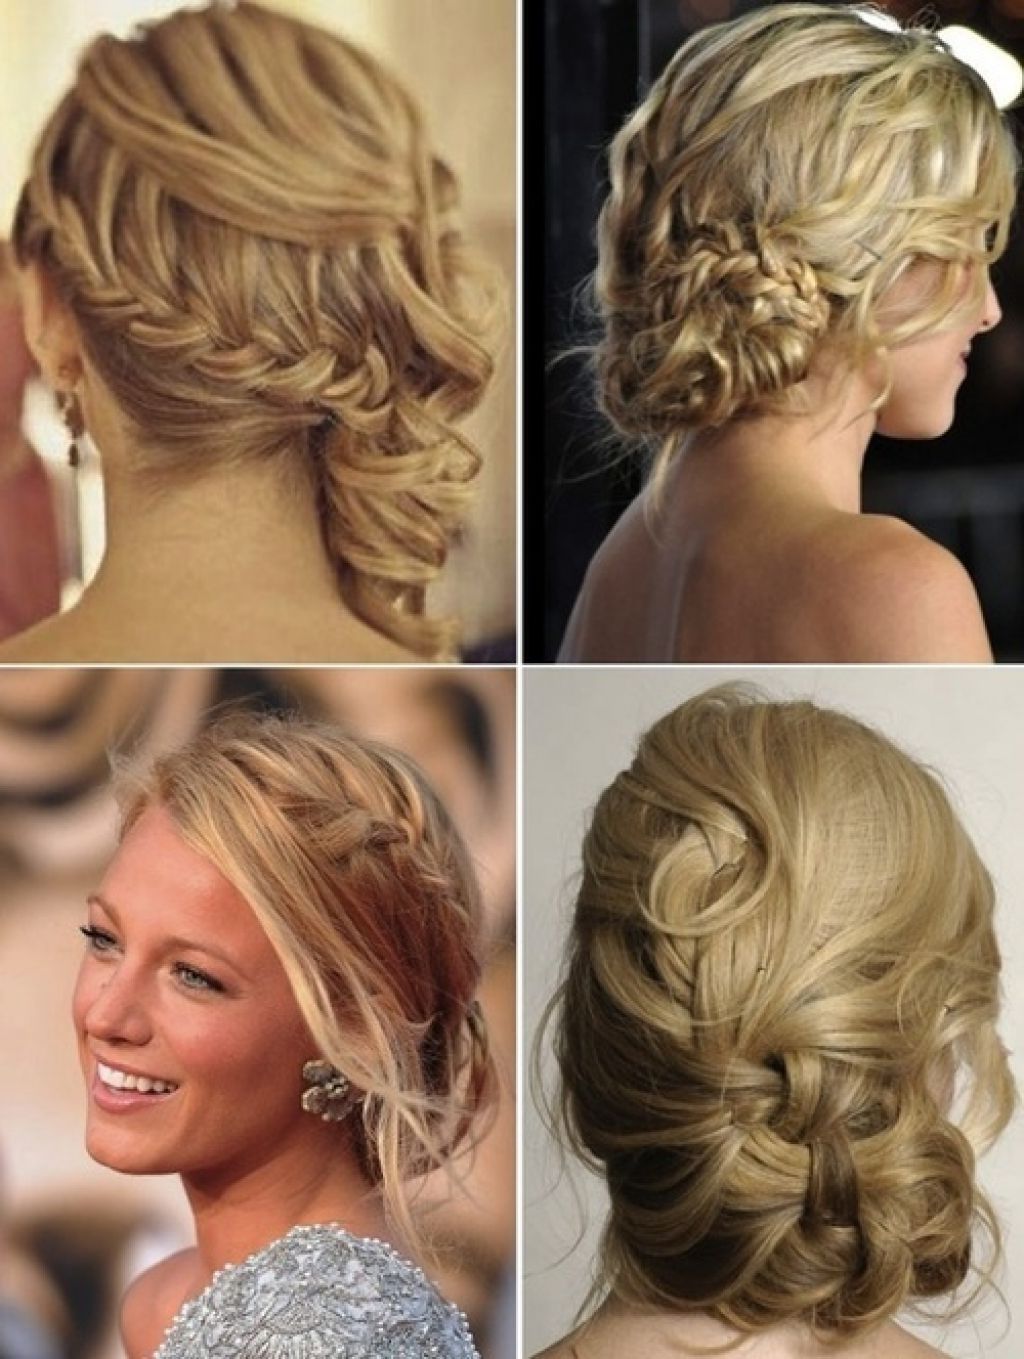 Famous Cute Wedding Guest Hairstyles For Short Hair For Casual Wedding Hairstyles For Long Hair – Hairstyle For Women & Man (View 13 of 15)